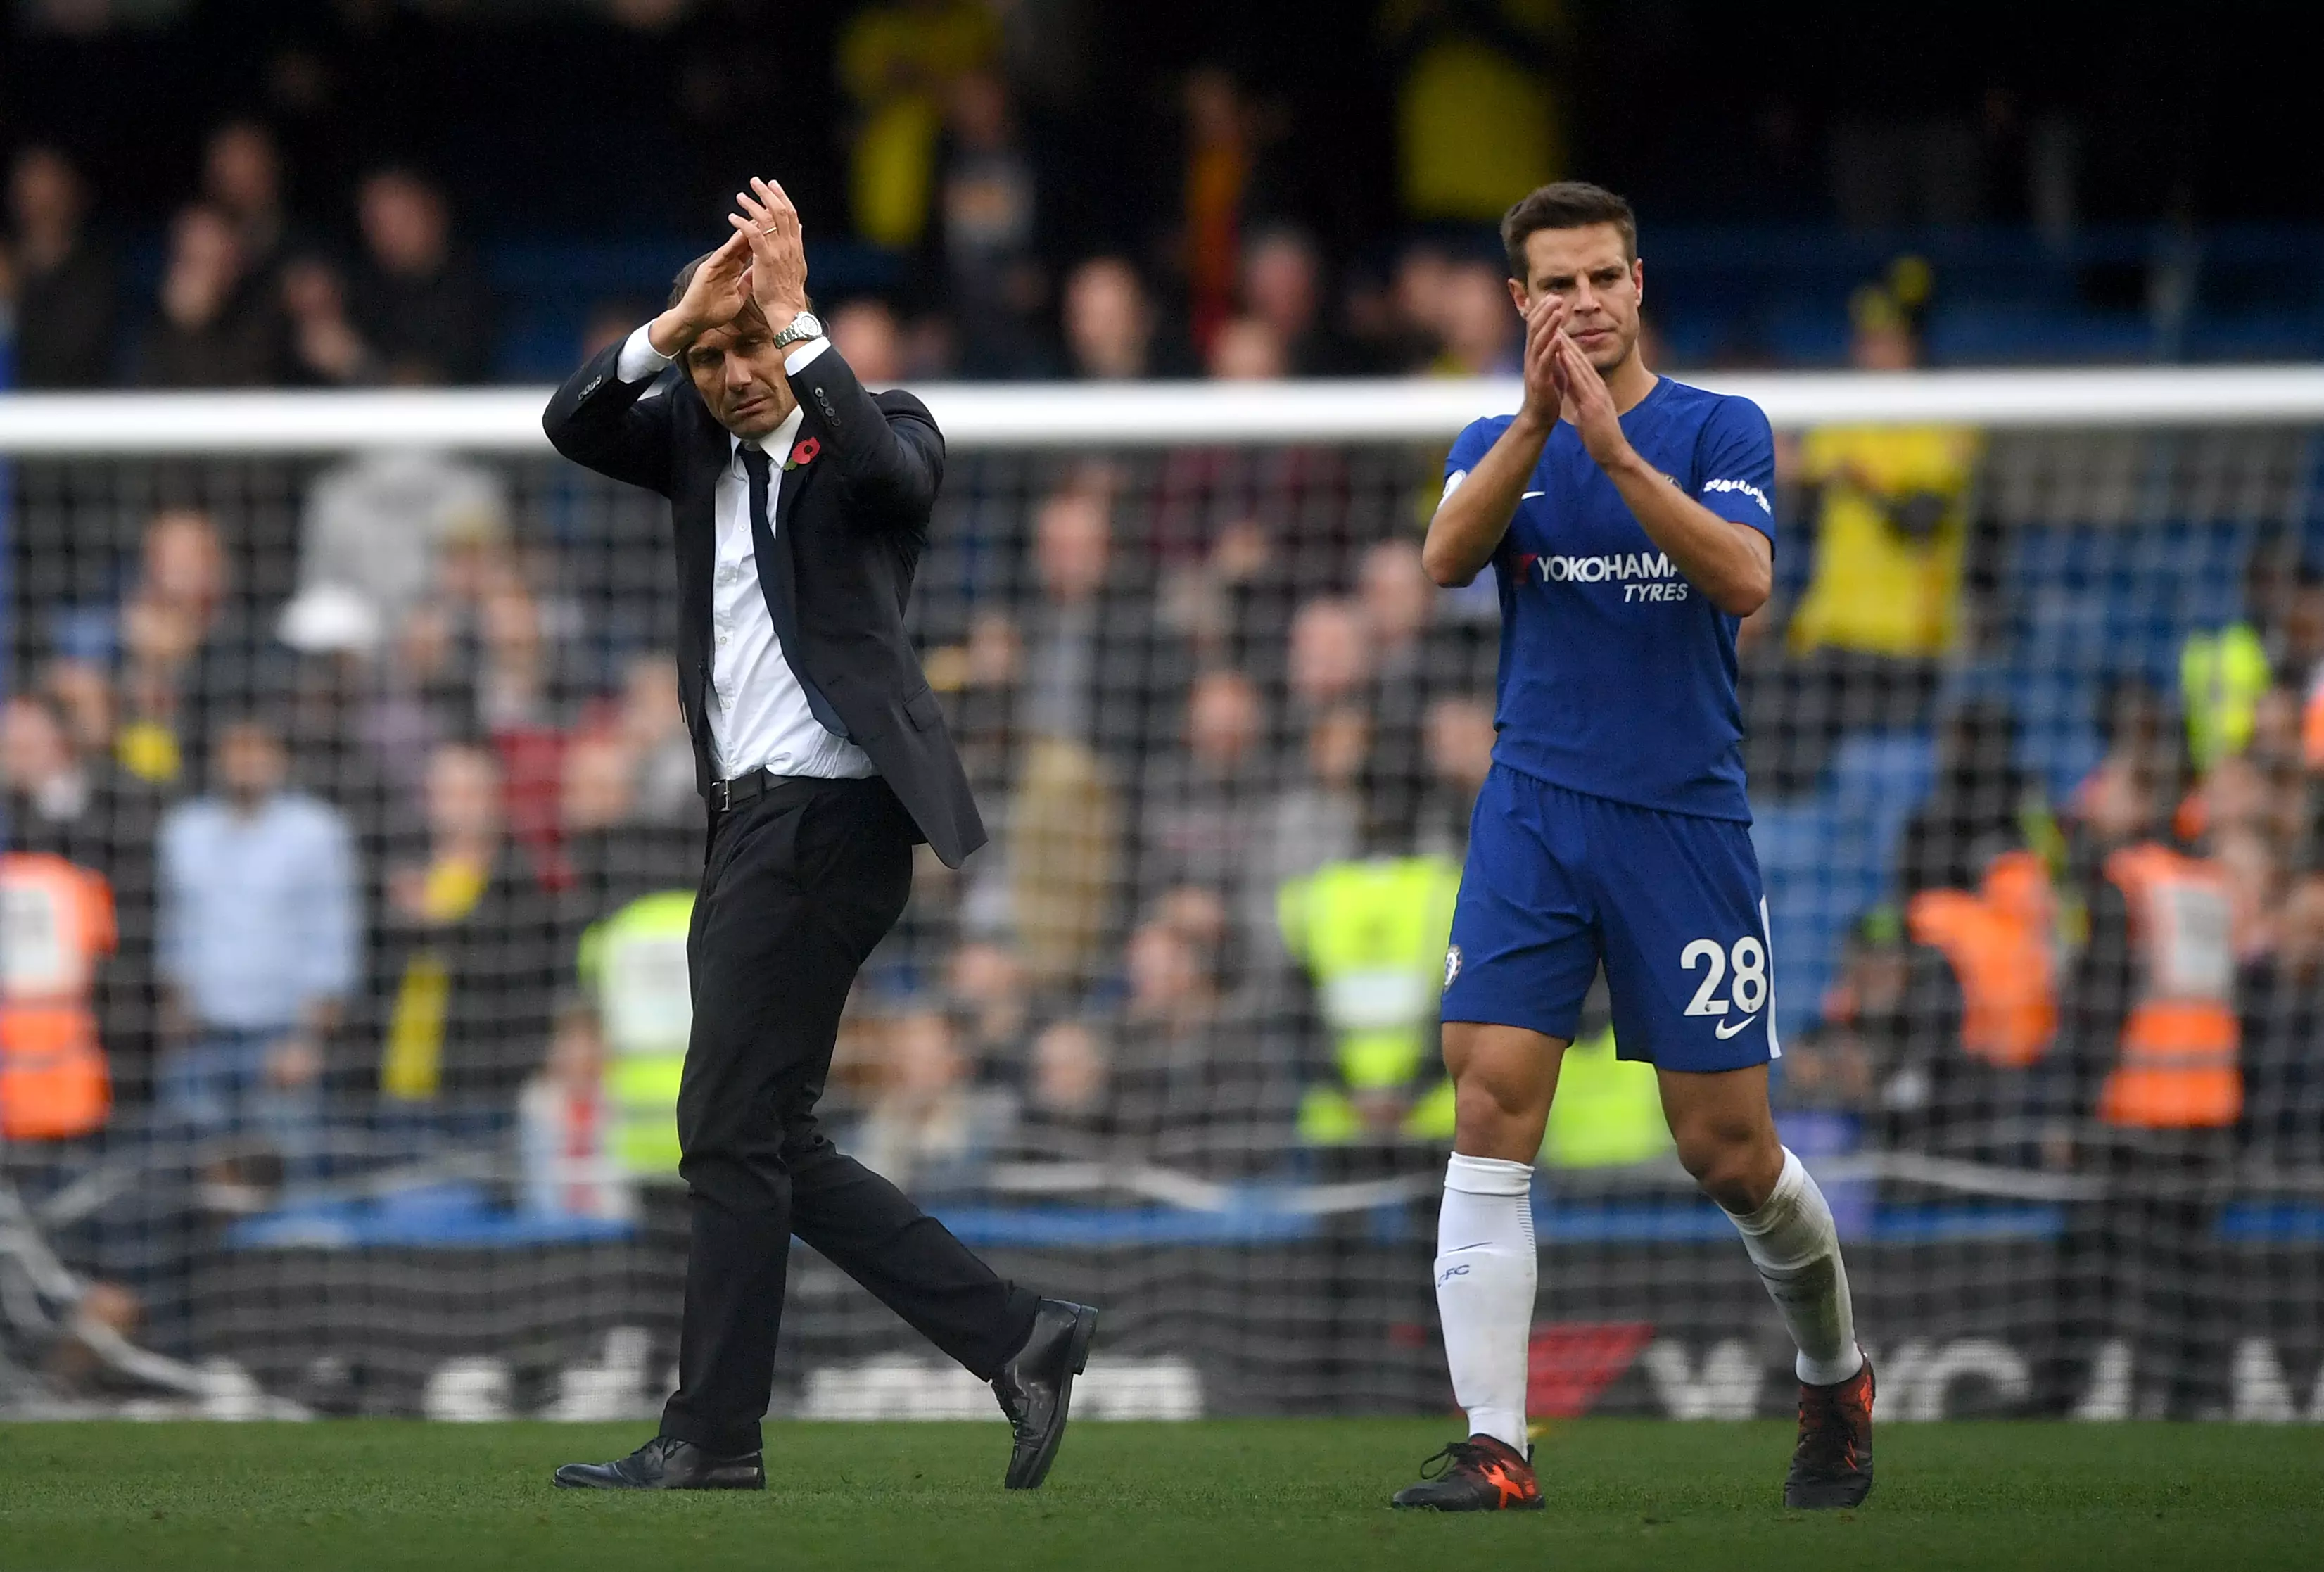 After a terrific debut season, Conte has come under fire at Stamford Bridge during his second term. Images: PA